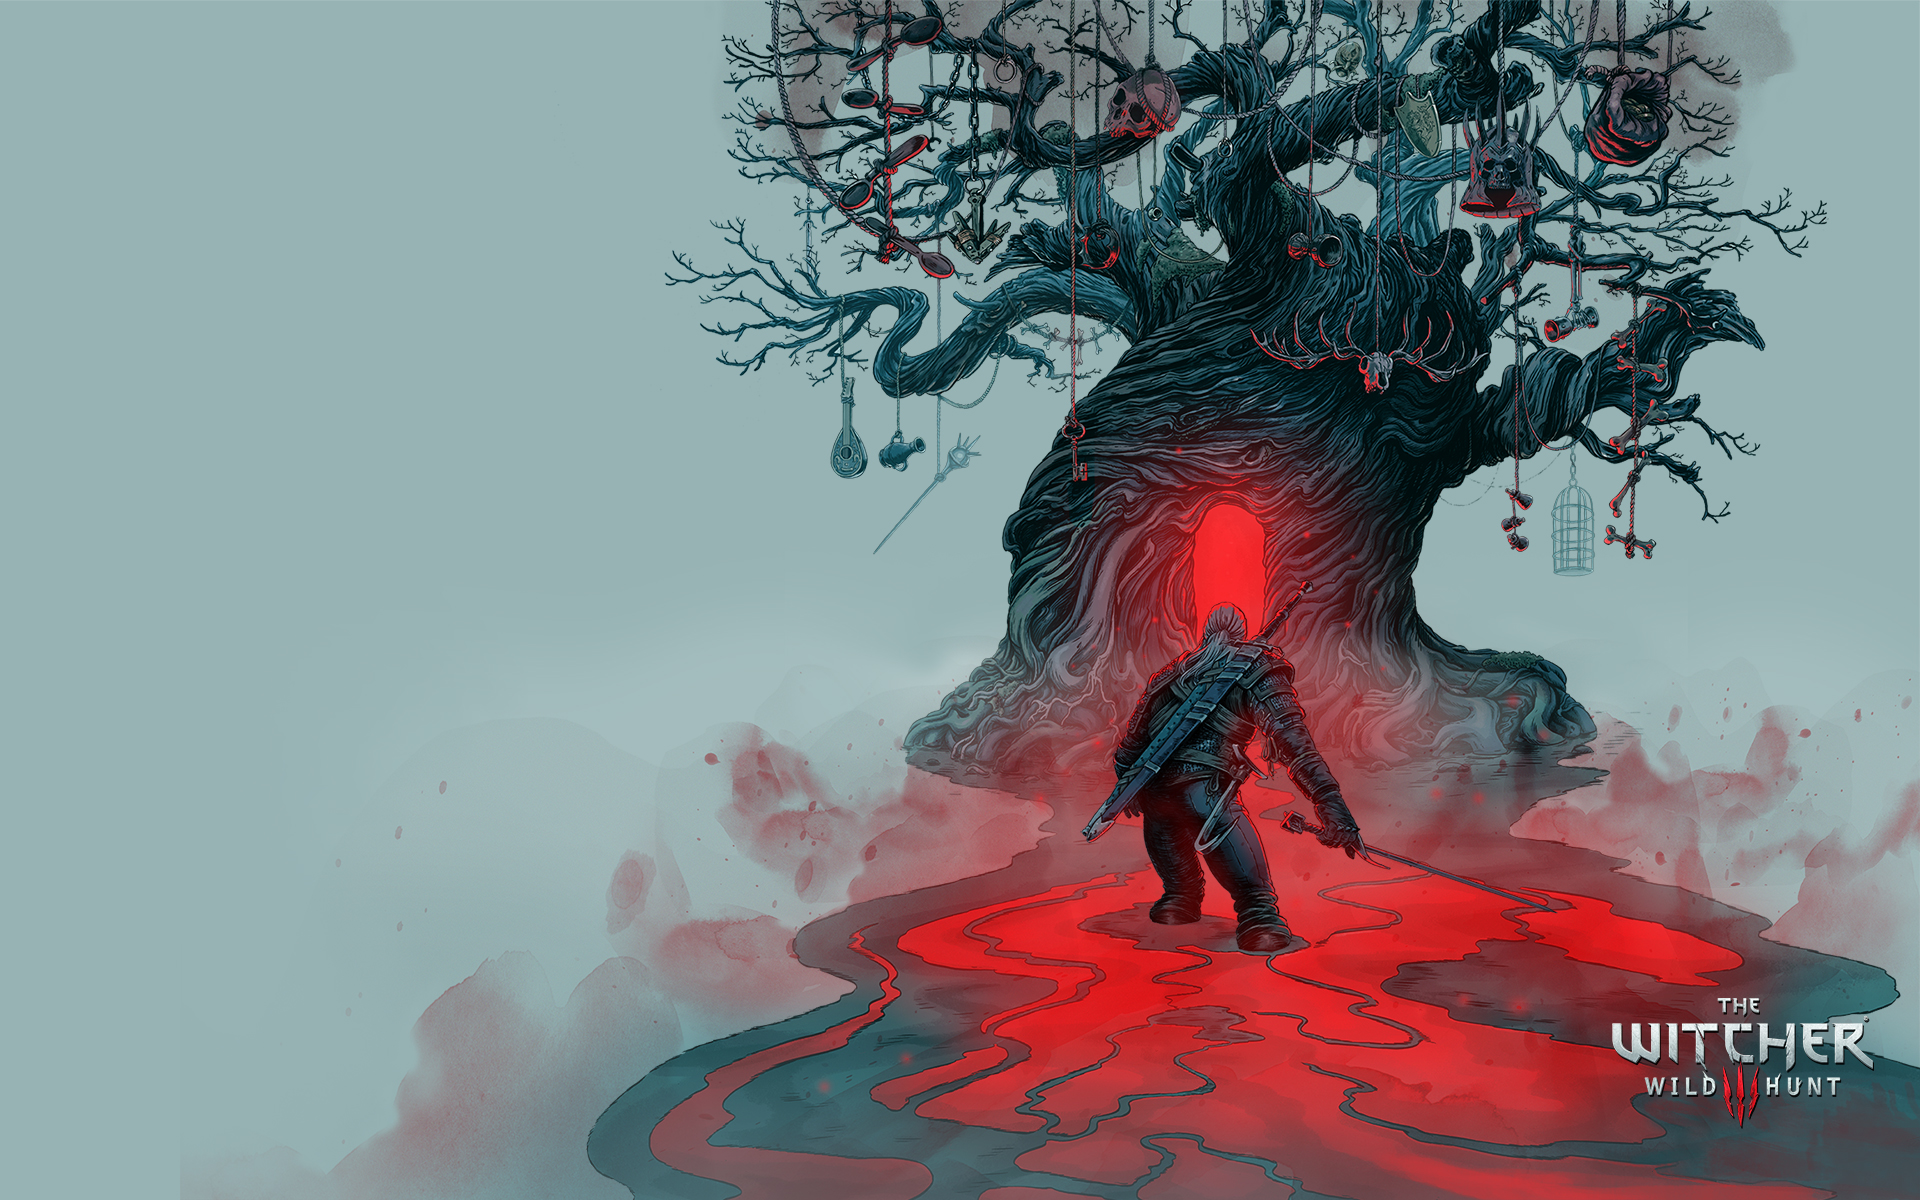 Striking New Witcher 3 PC Wallpaper Released, Download It Here - GameSpot